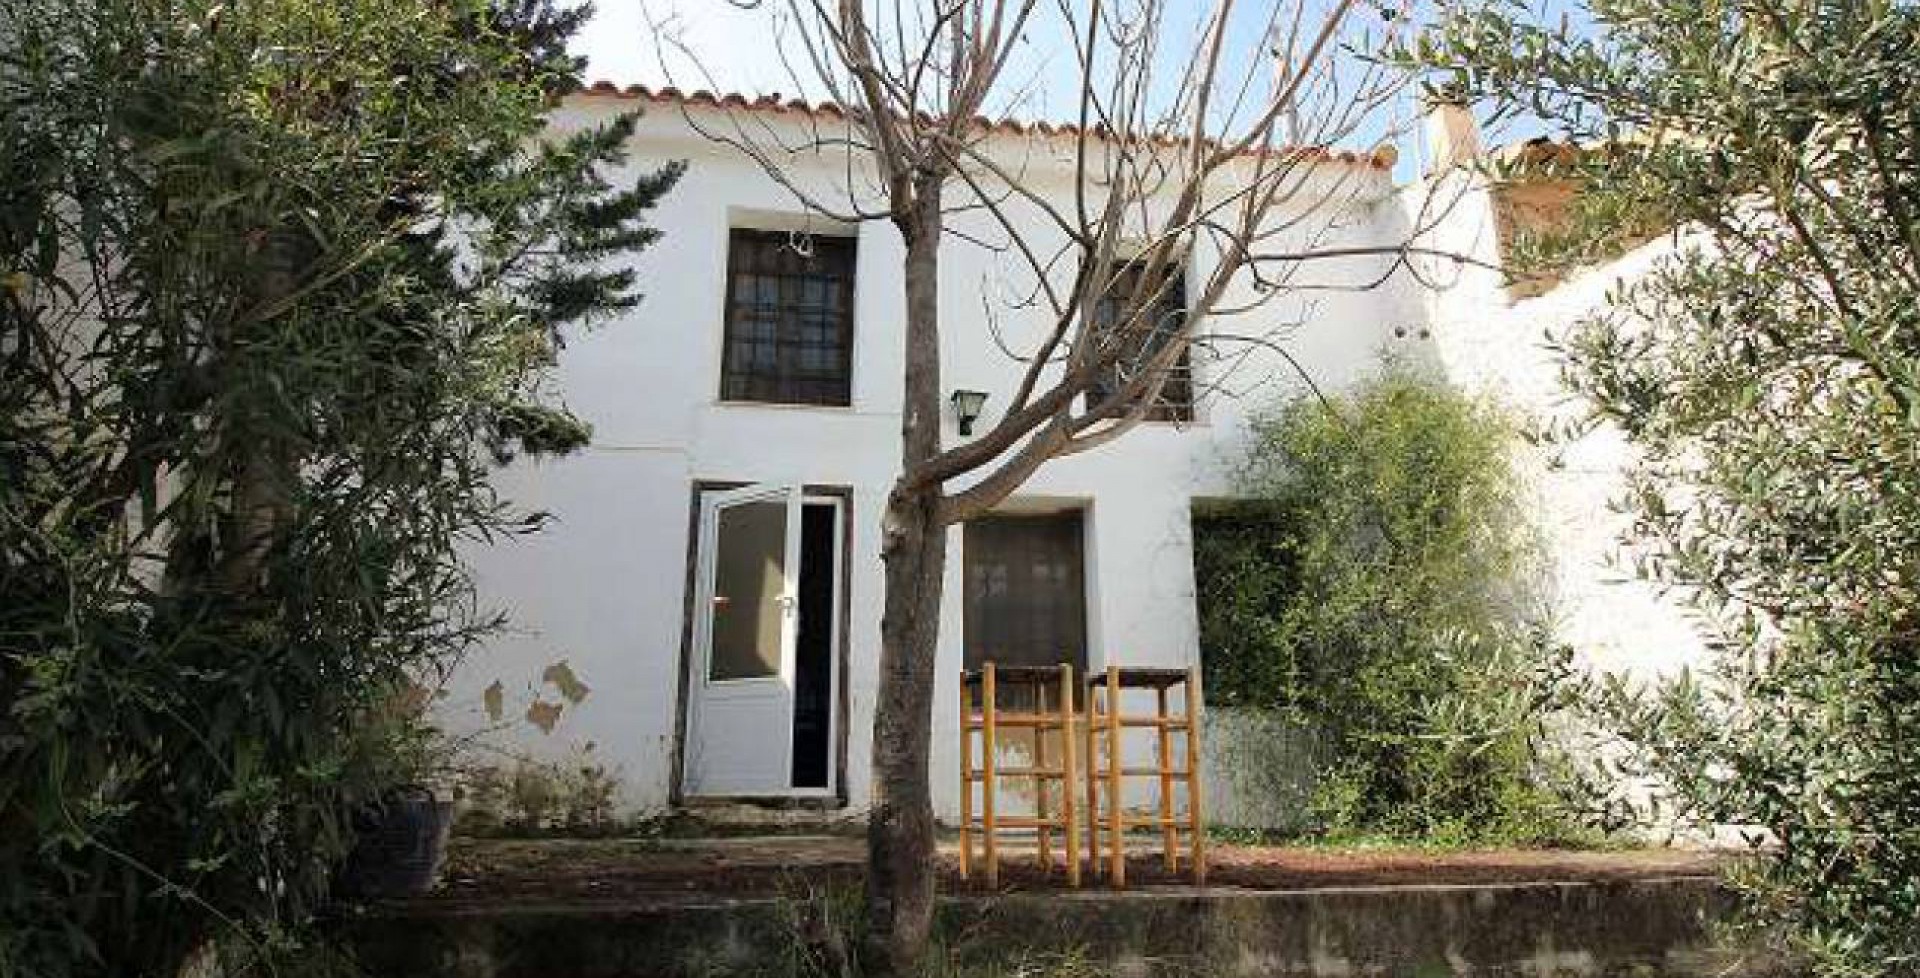 Charming country house with great views, Ricote, Murcia, Spain